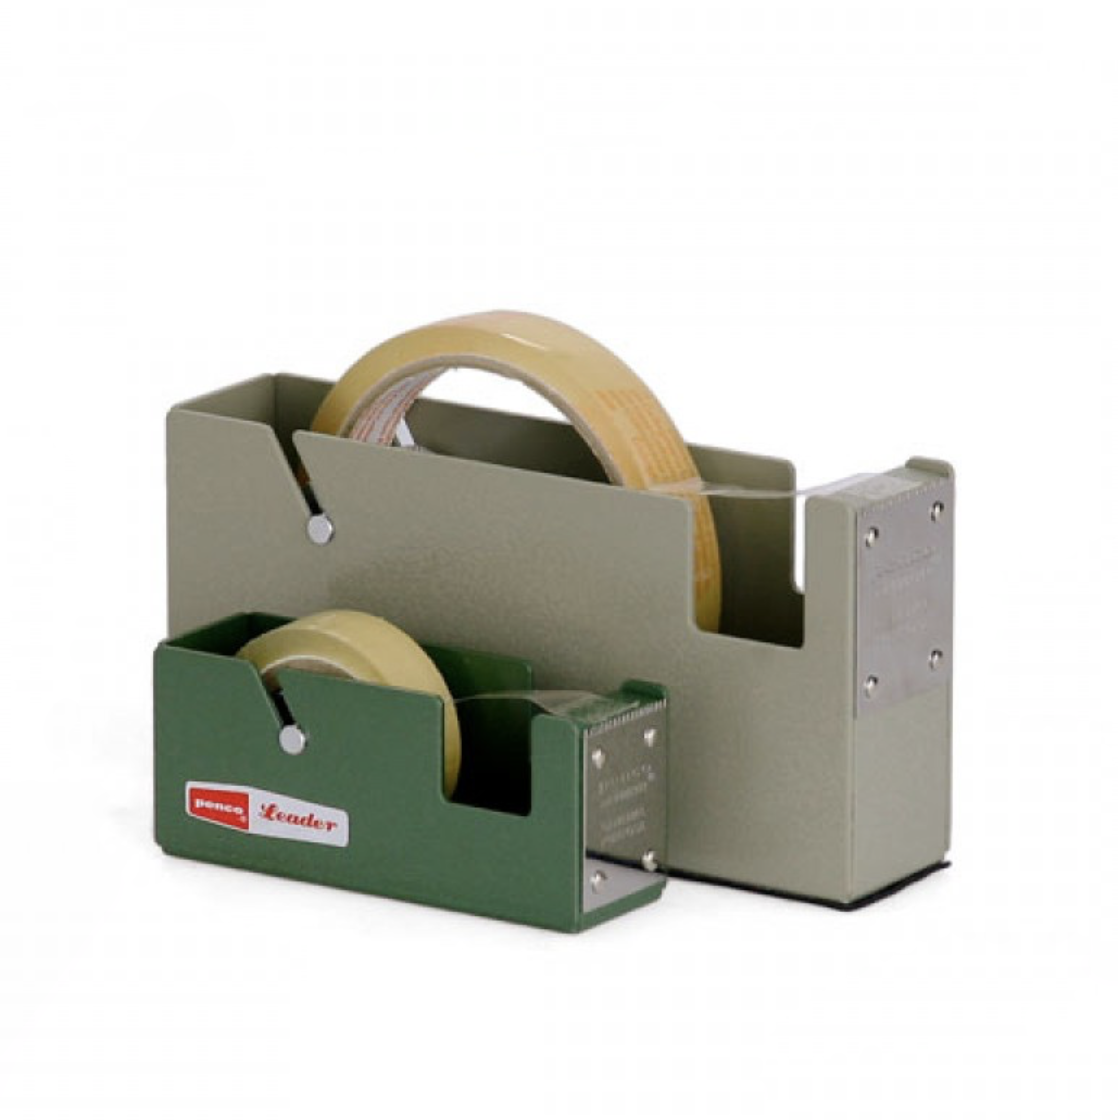 Small Tape Dispenser in Army Green